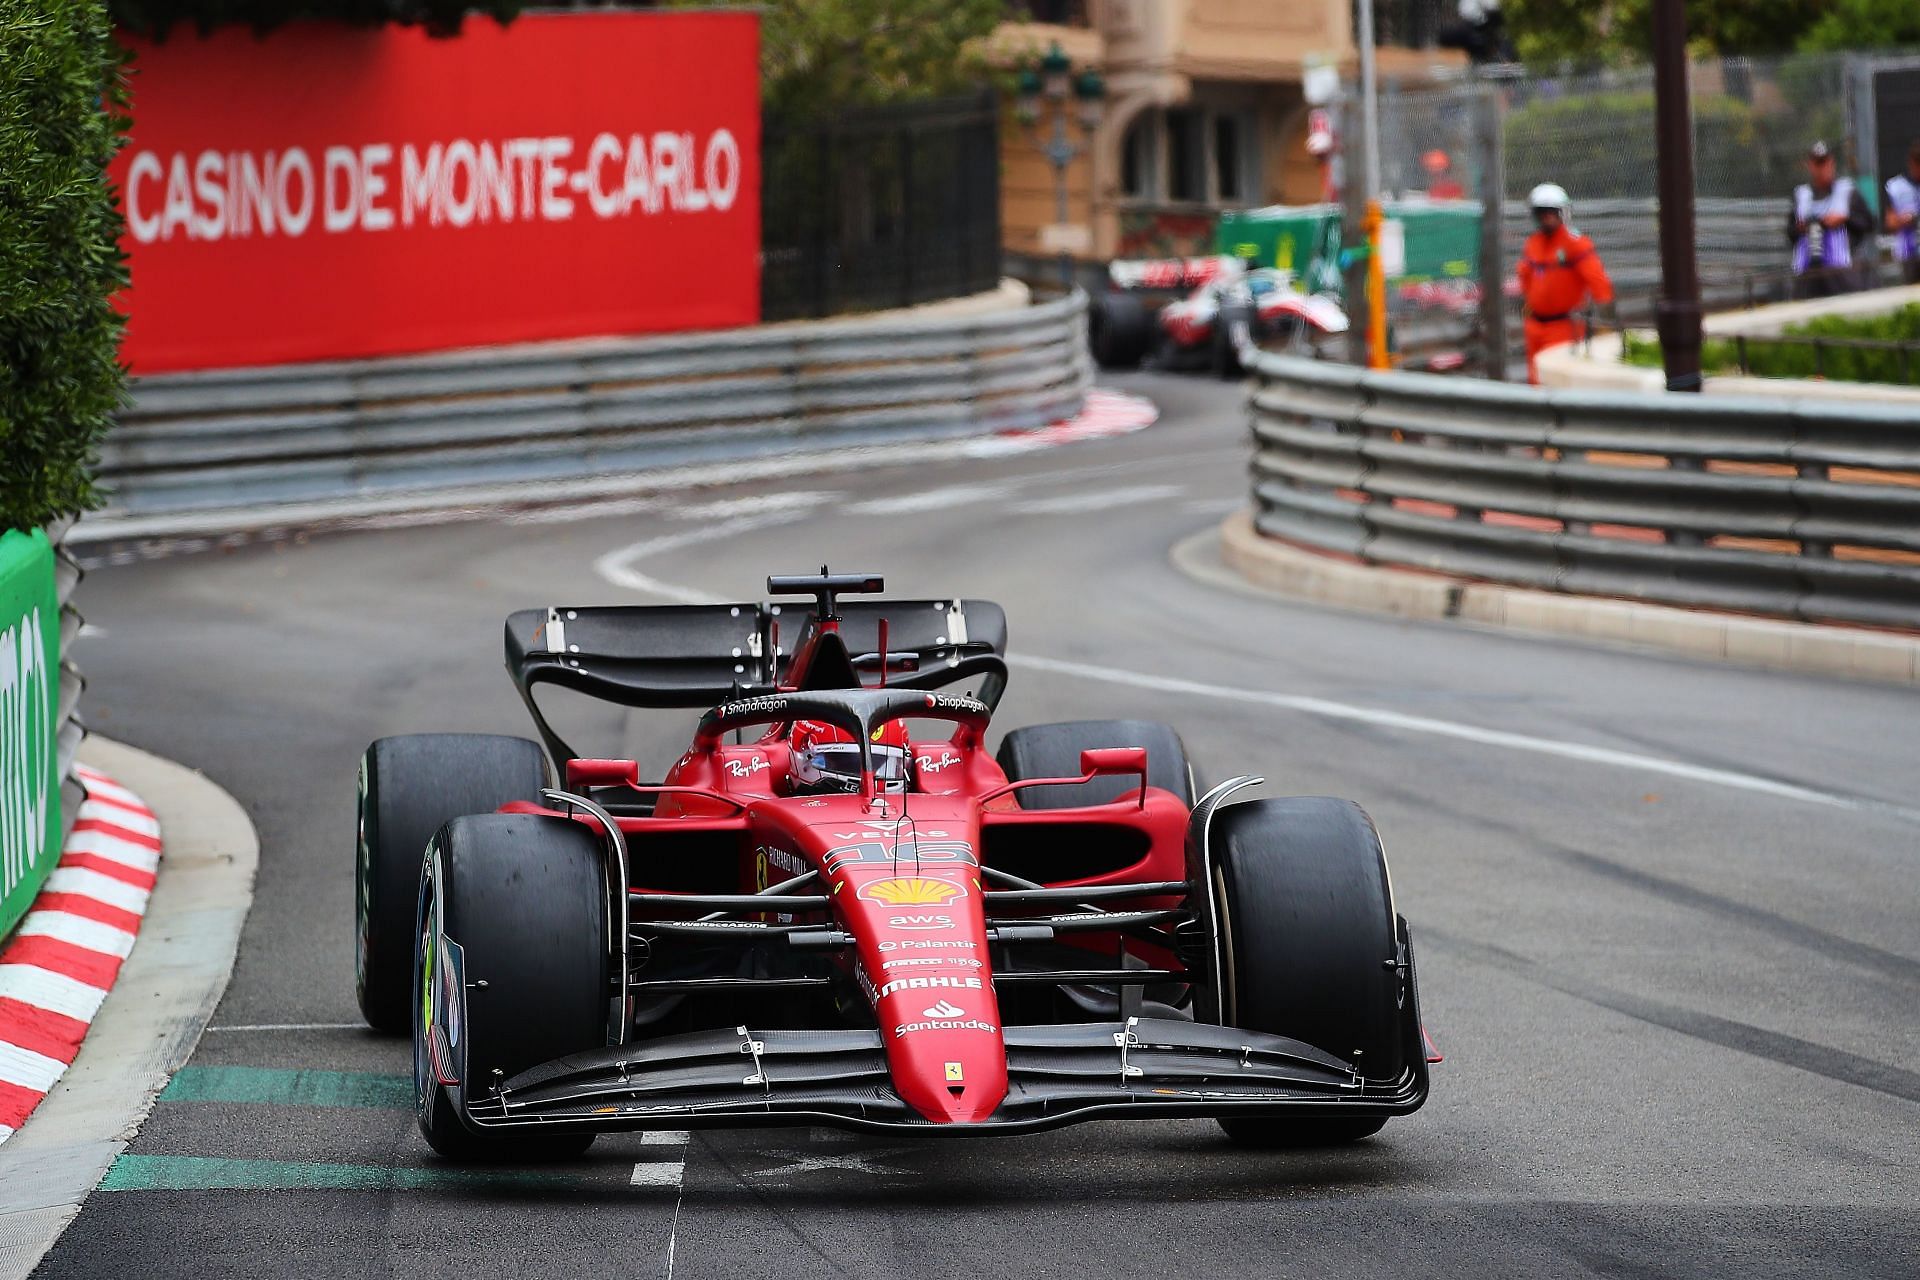 Ferrari has been in this position before and it did not work out for the team